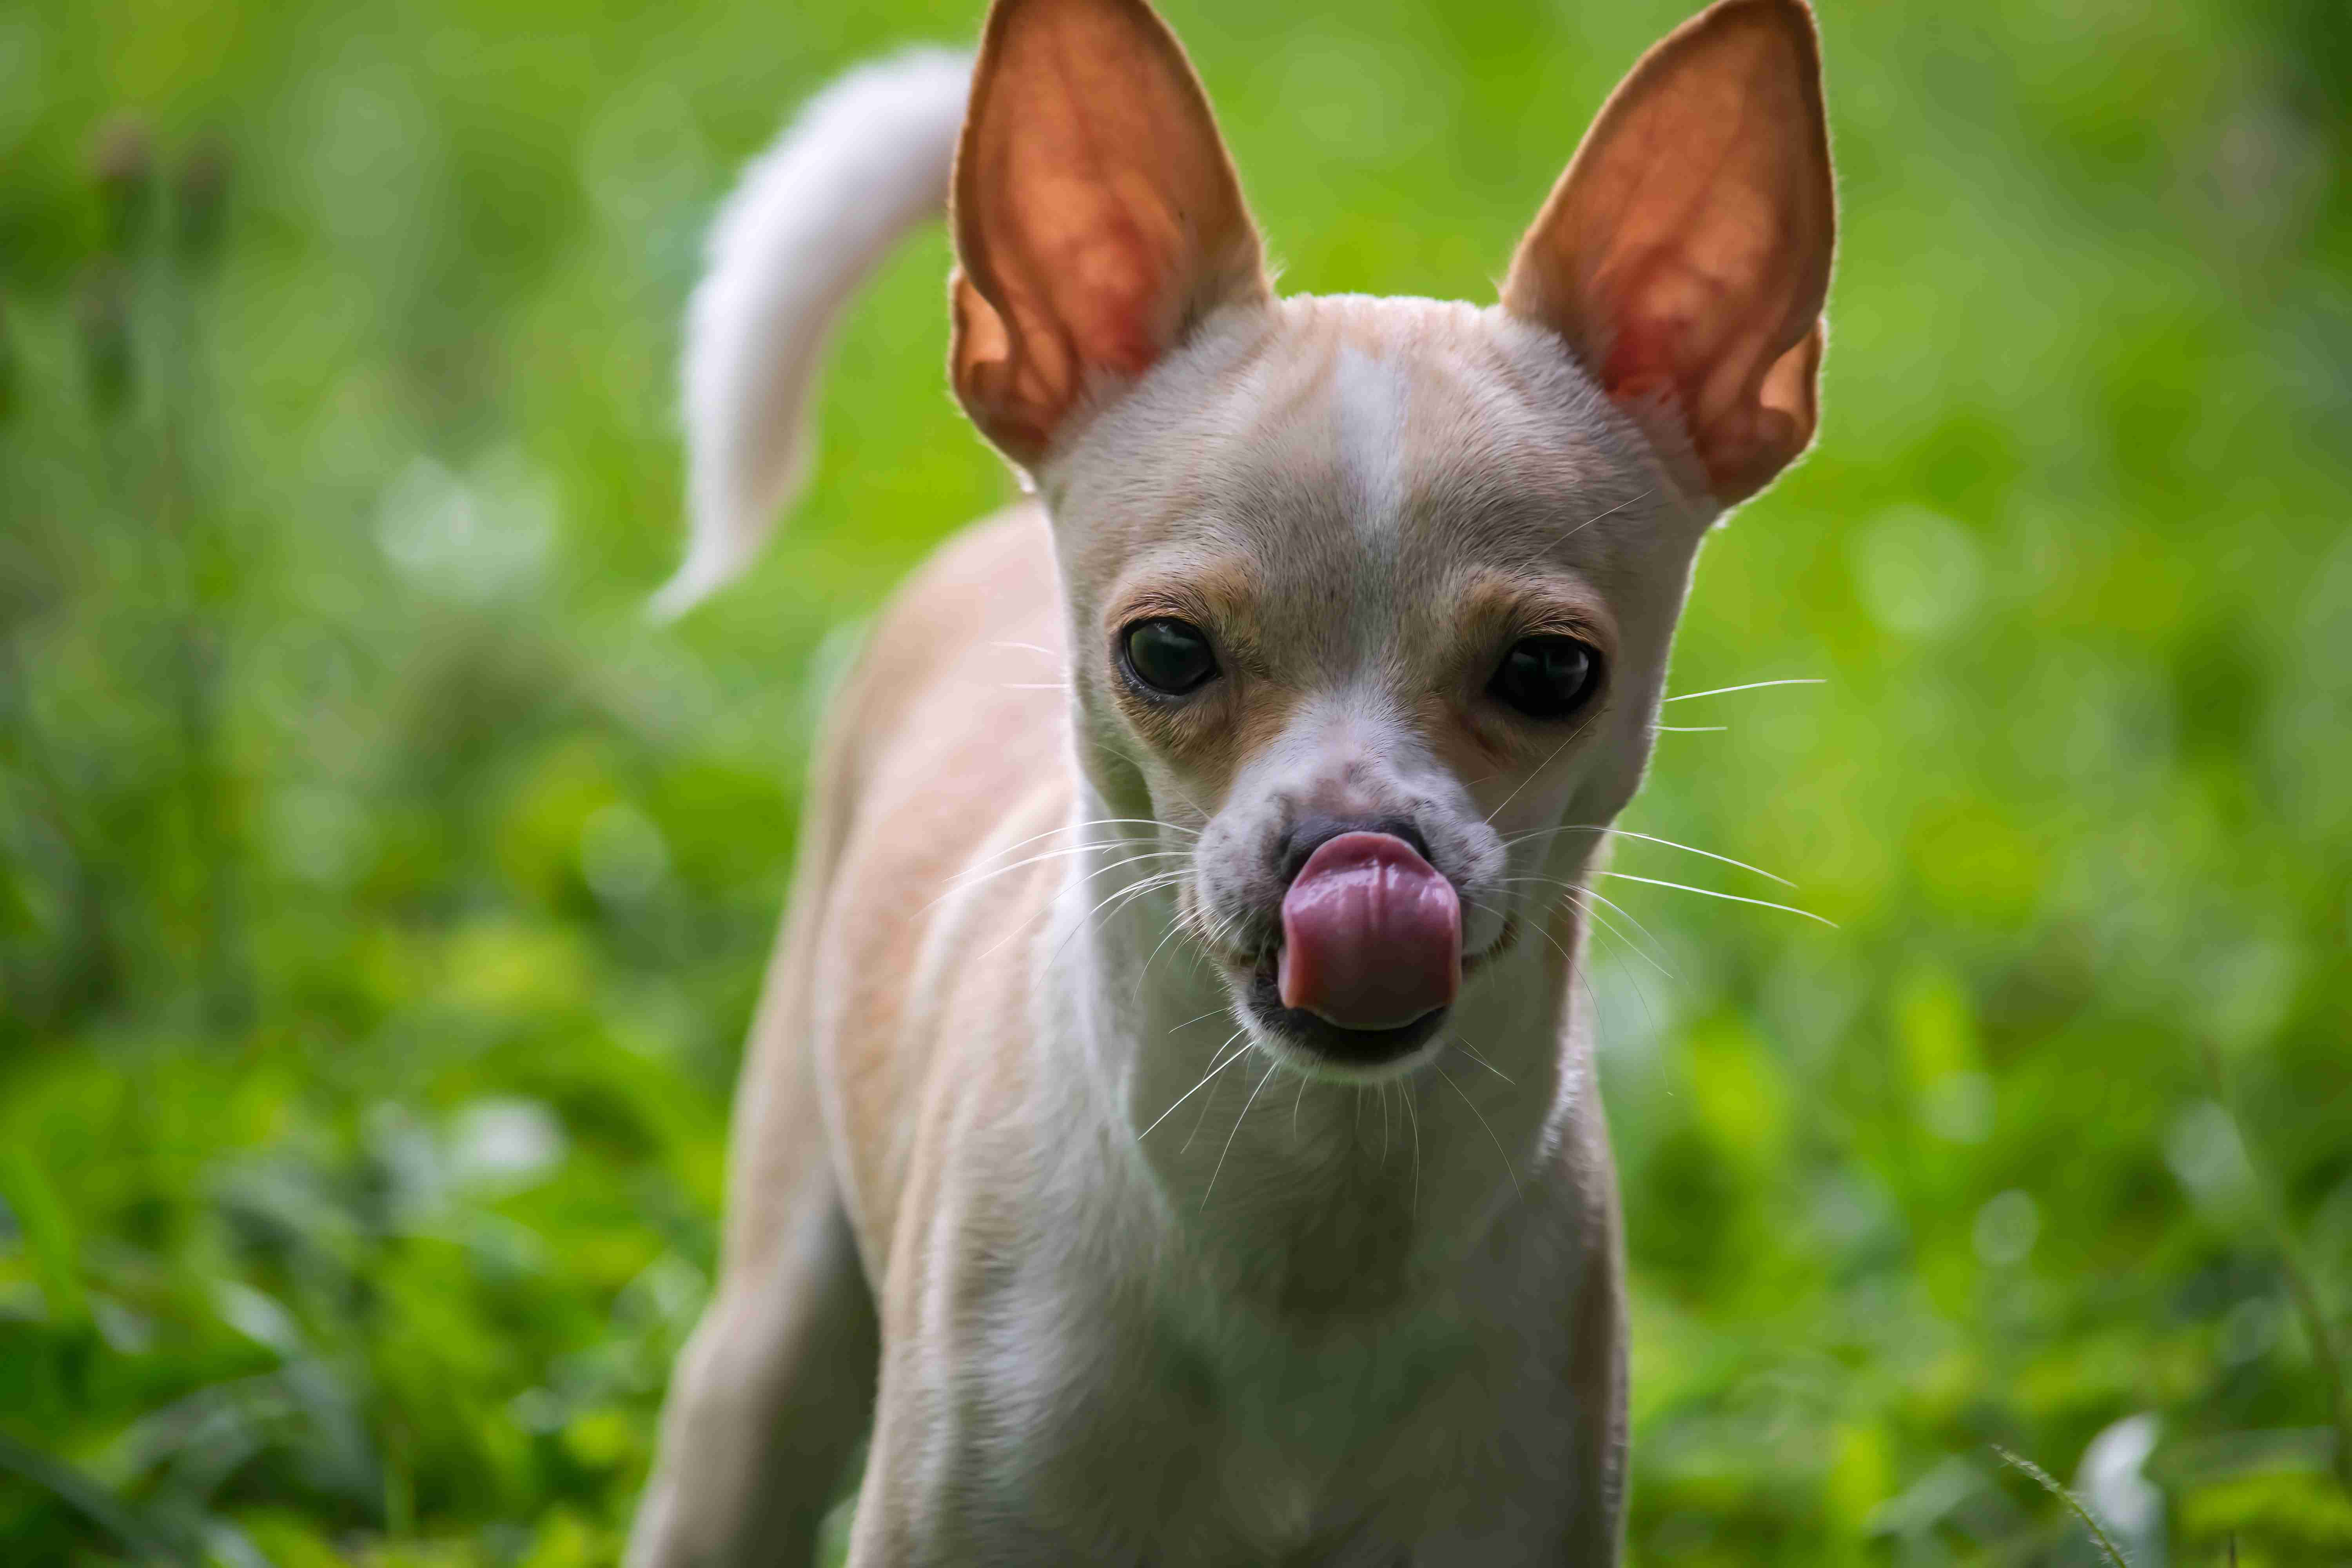 Can Chihuahuas become aggressive towards children, and if so, how can this be prevented?